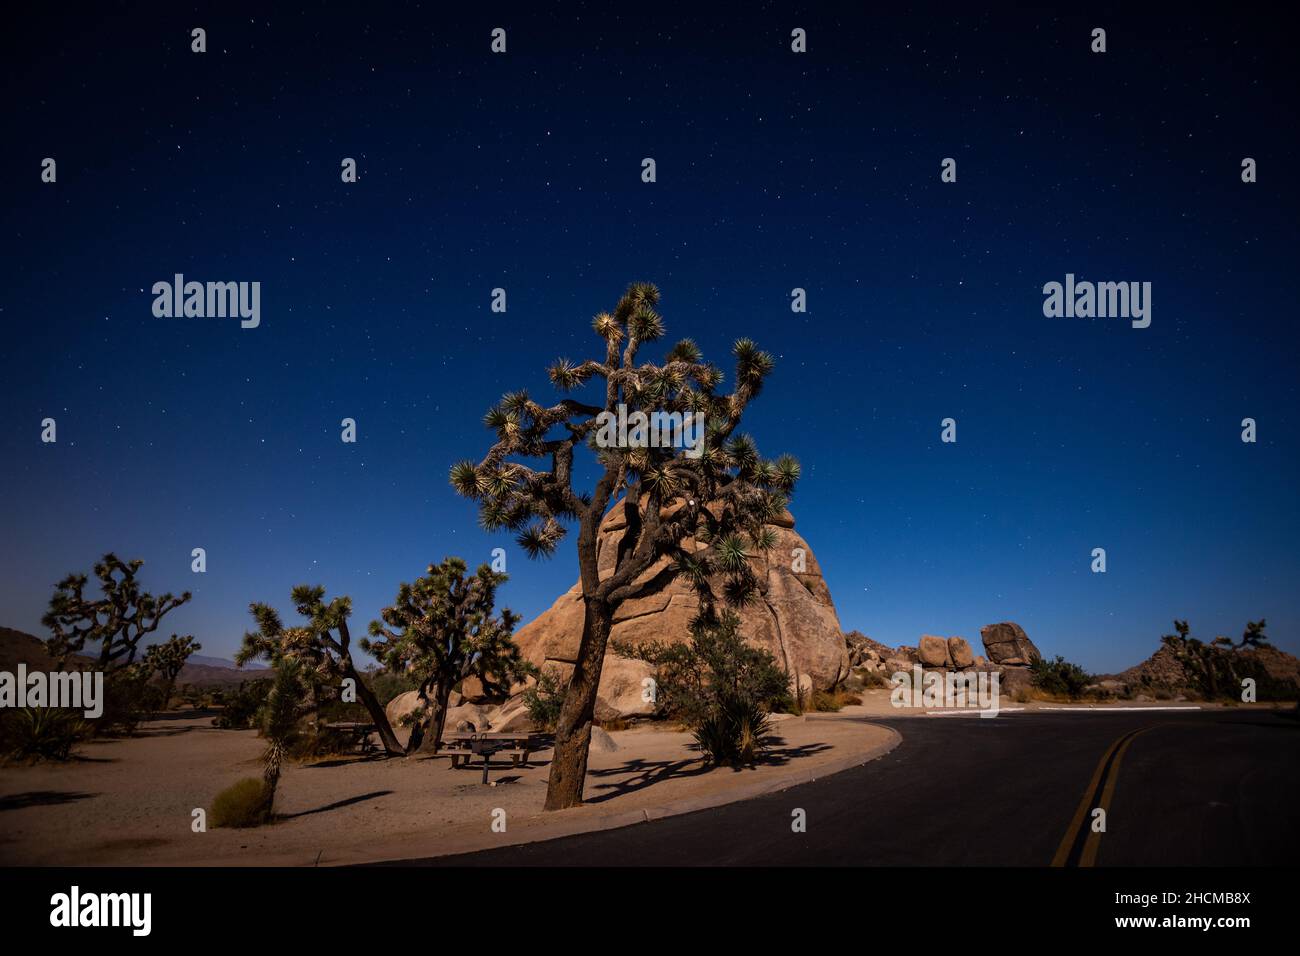 A beautiful view of a Joshua tree national park under the starry night sky Stock Photo